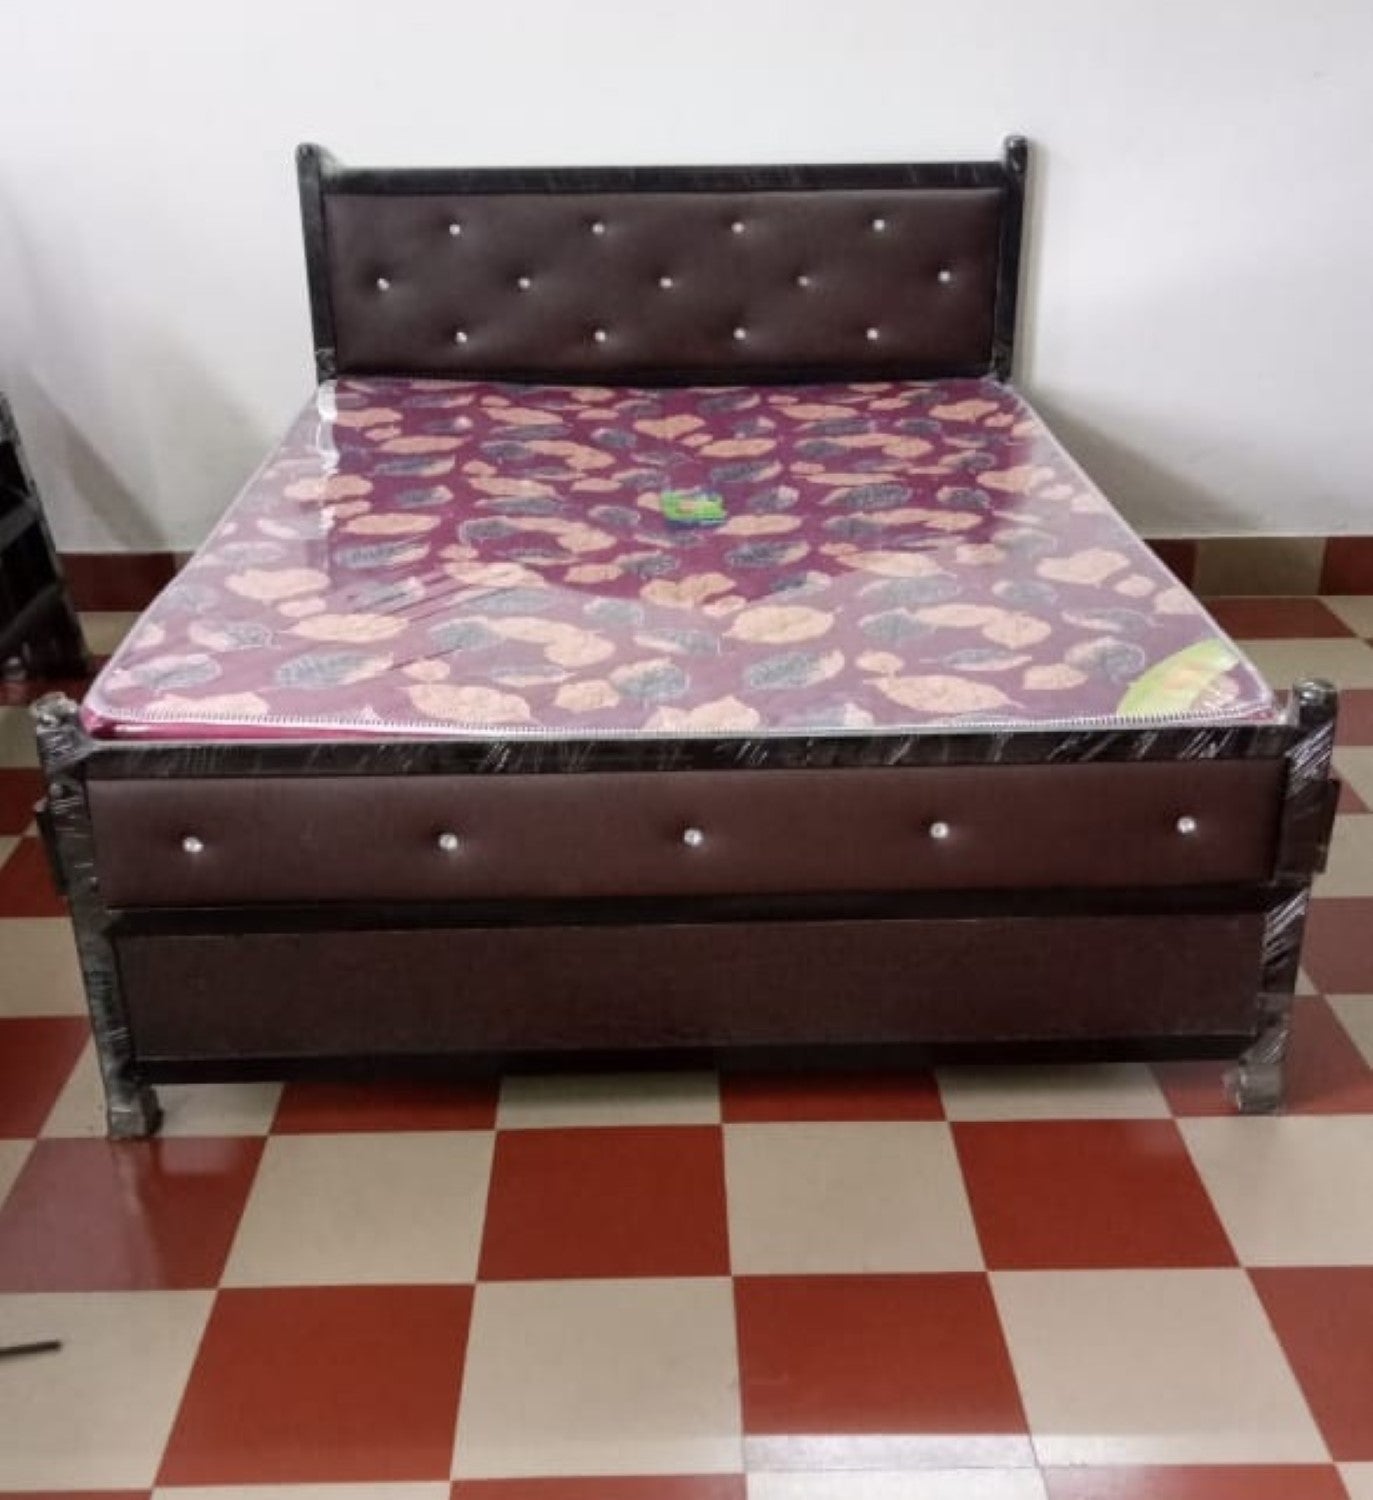 Bowzar NM Metal Bed Queen Size 5X6.5 Feet Coffee Mattress Not Included